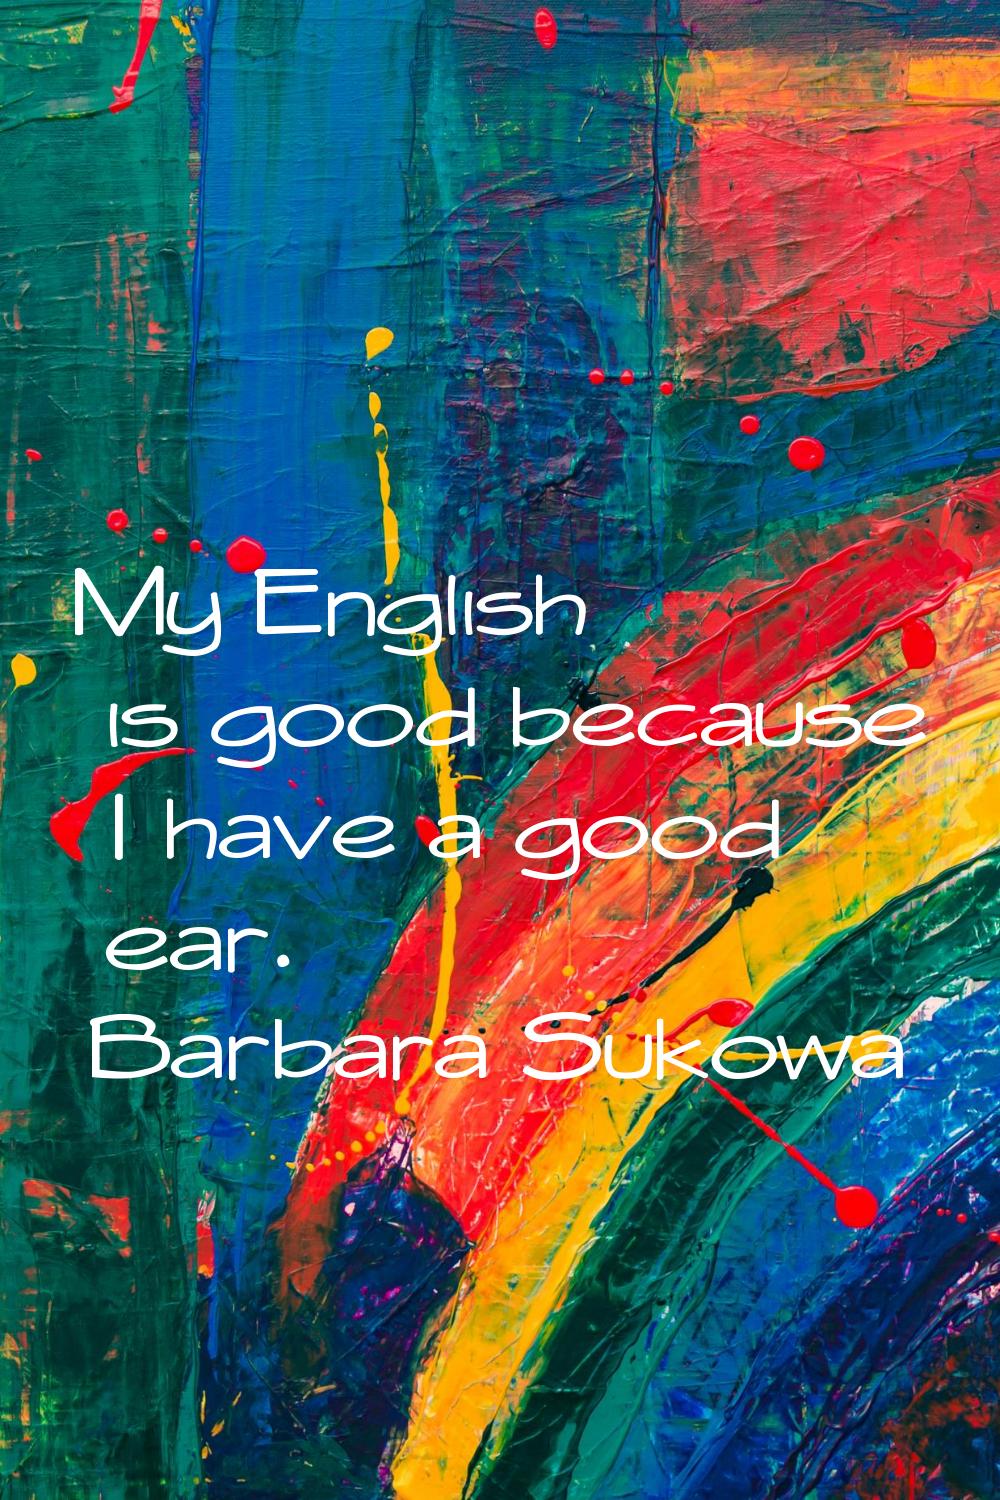 My English is good because I have a good ear.